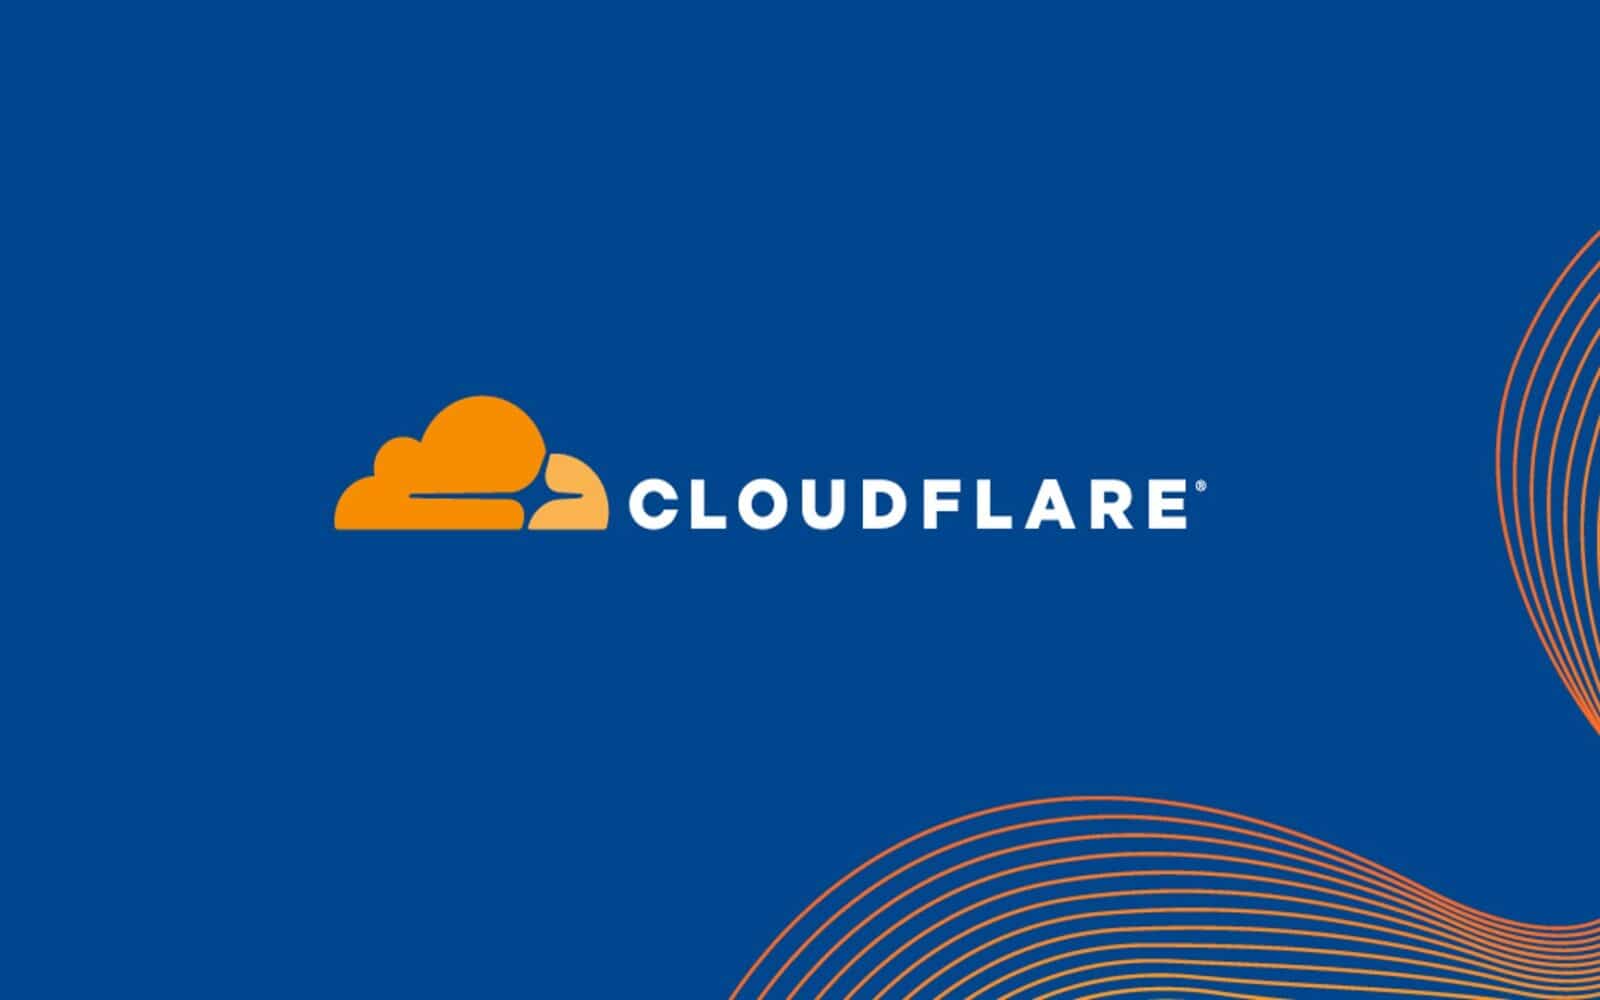 Panne internet cloudflare exchanges